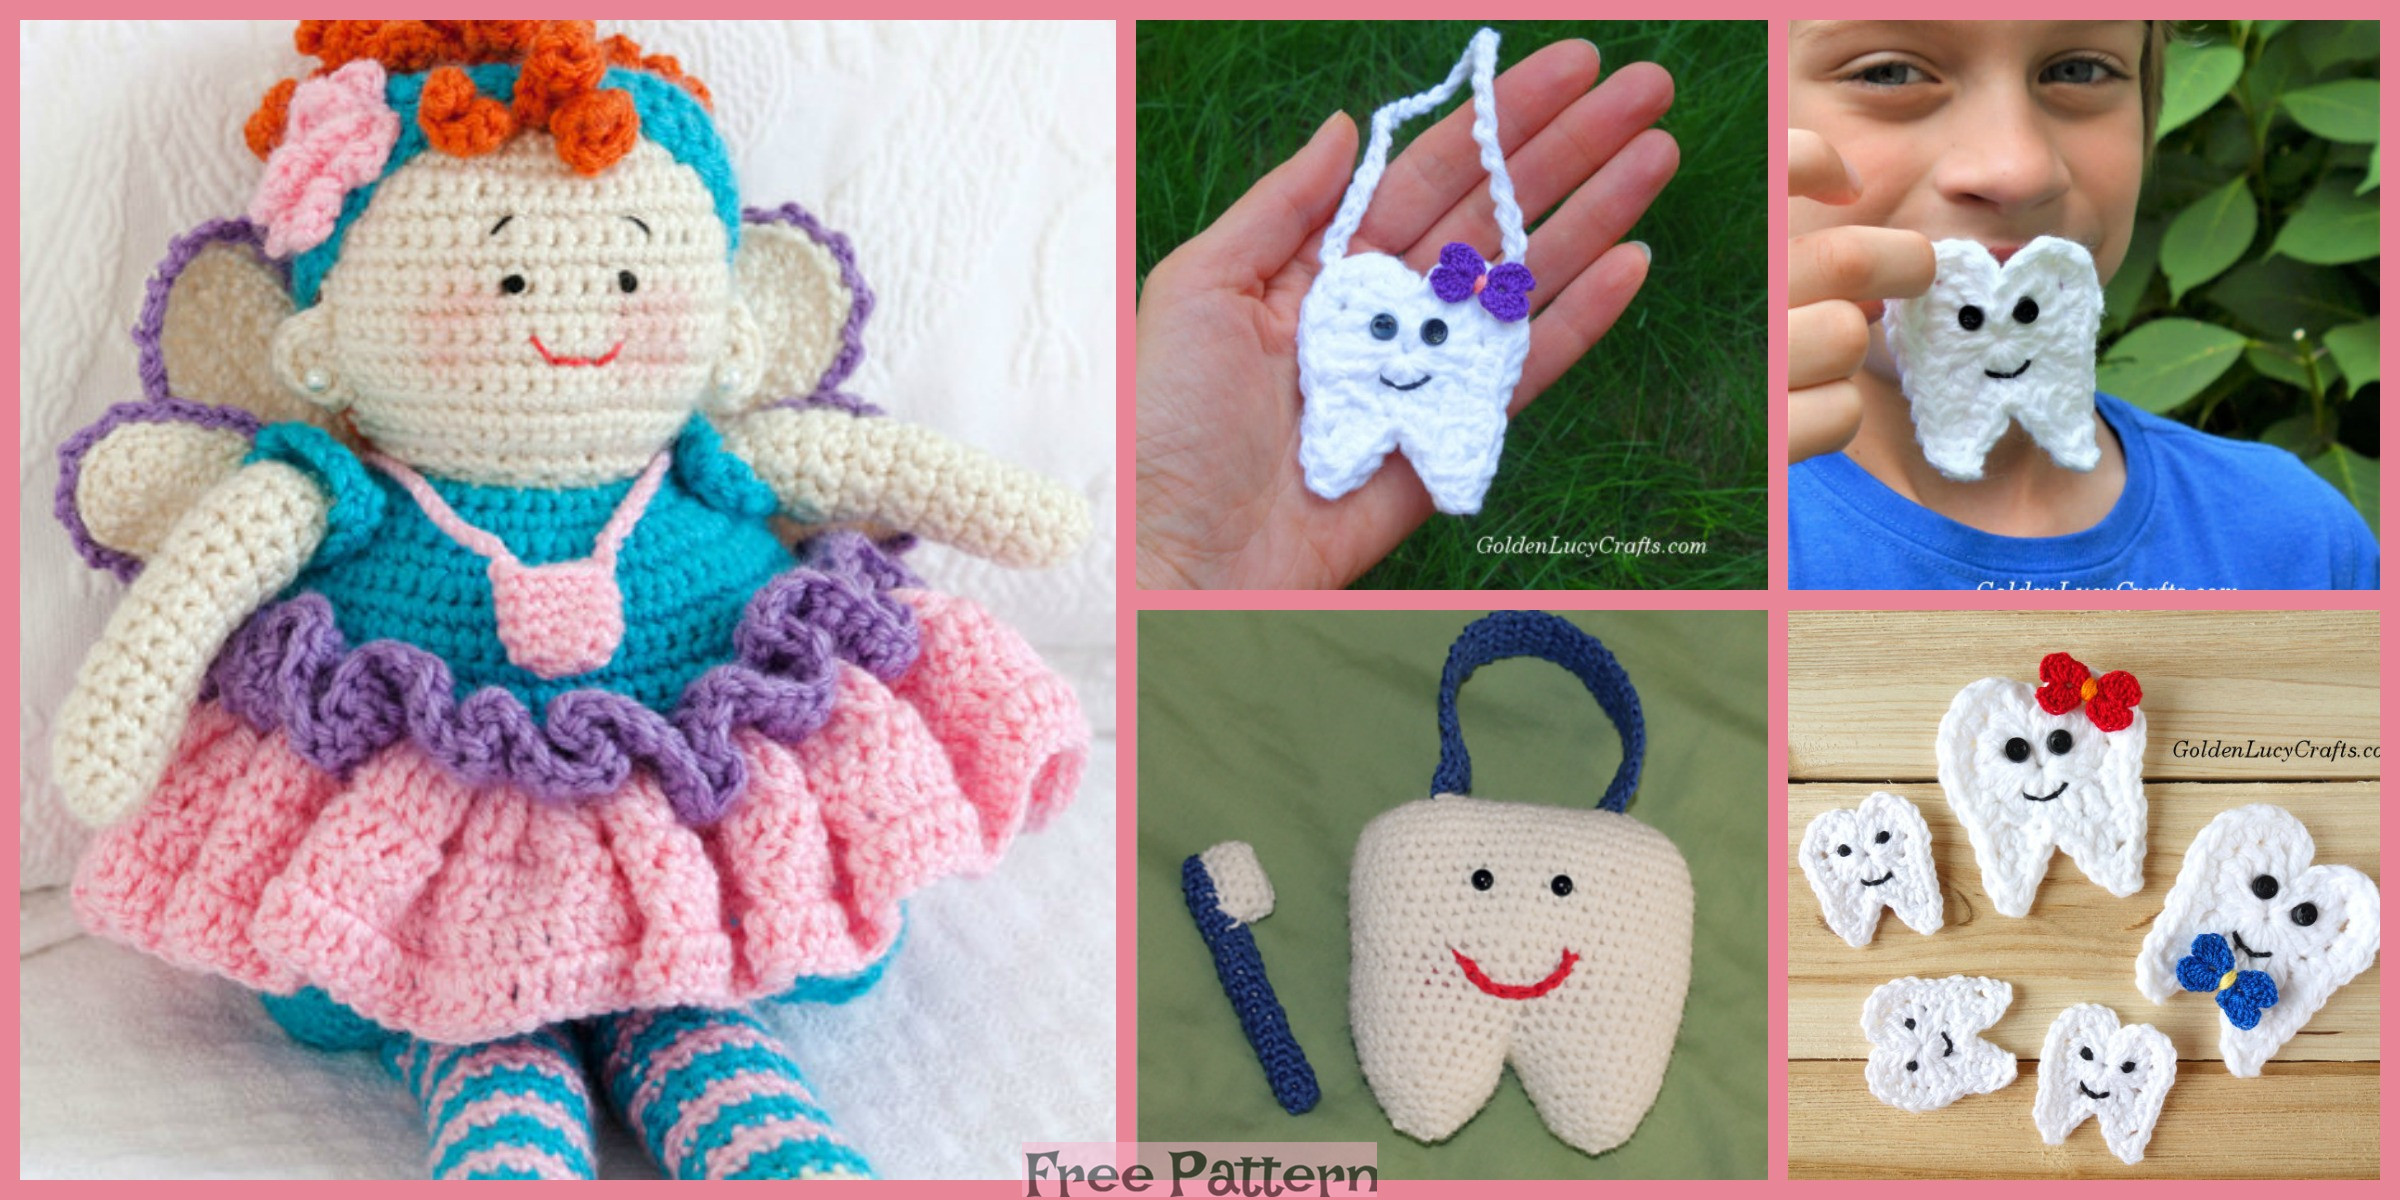 Adorable Crochet Tooth Fairy – Free Pattern